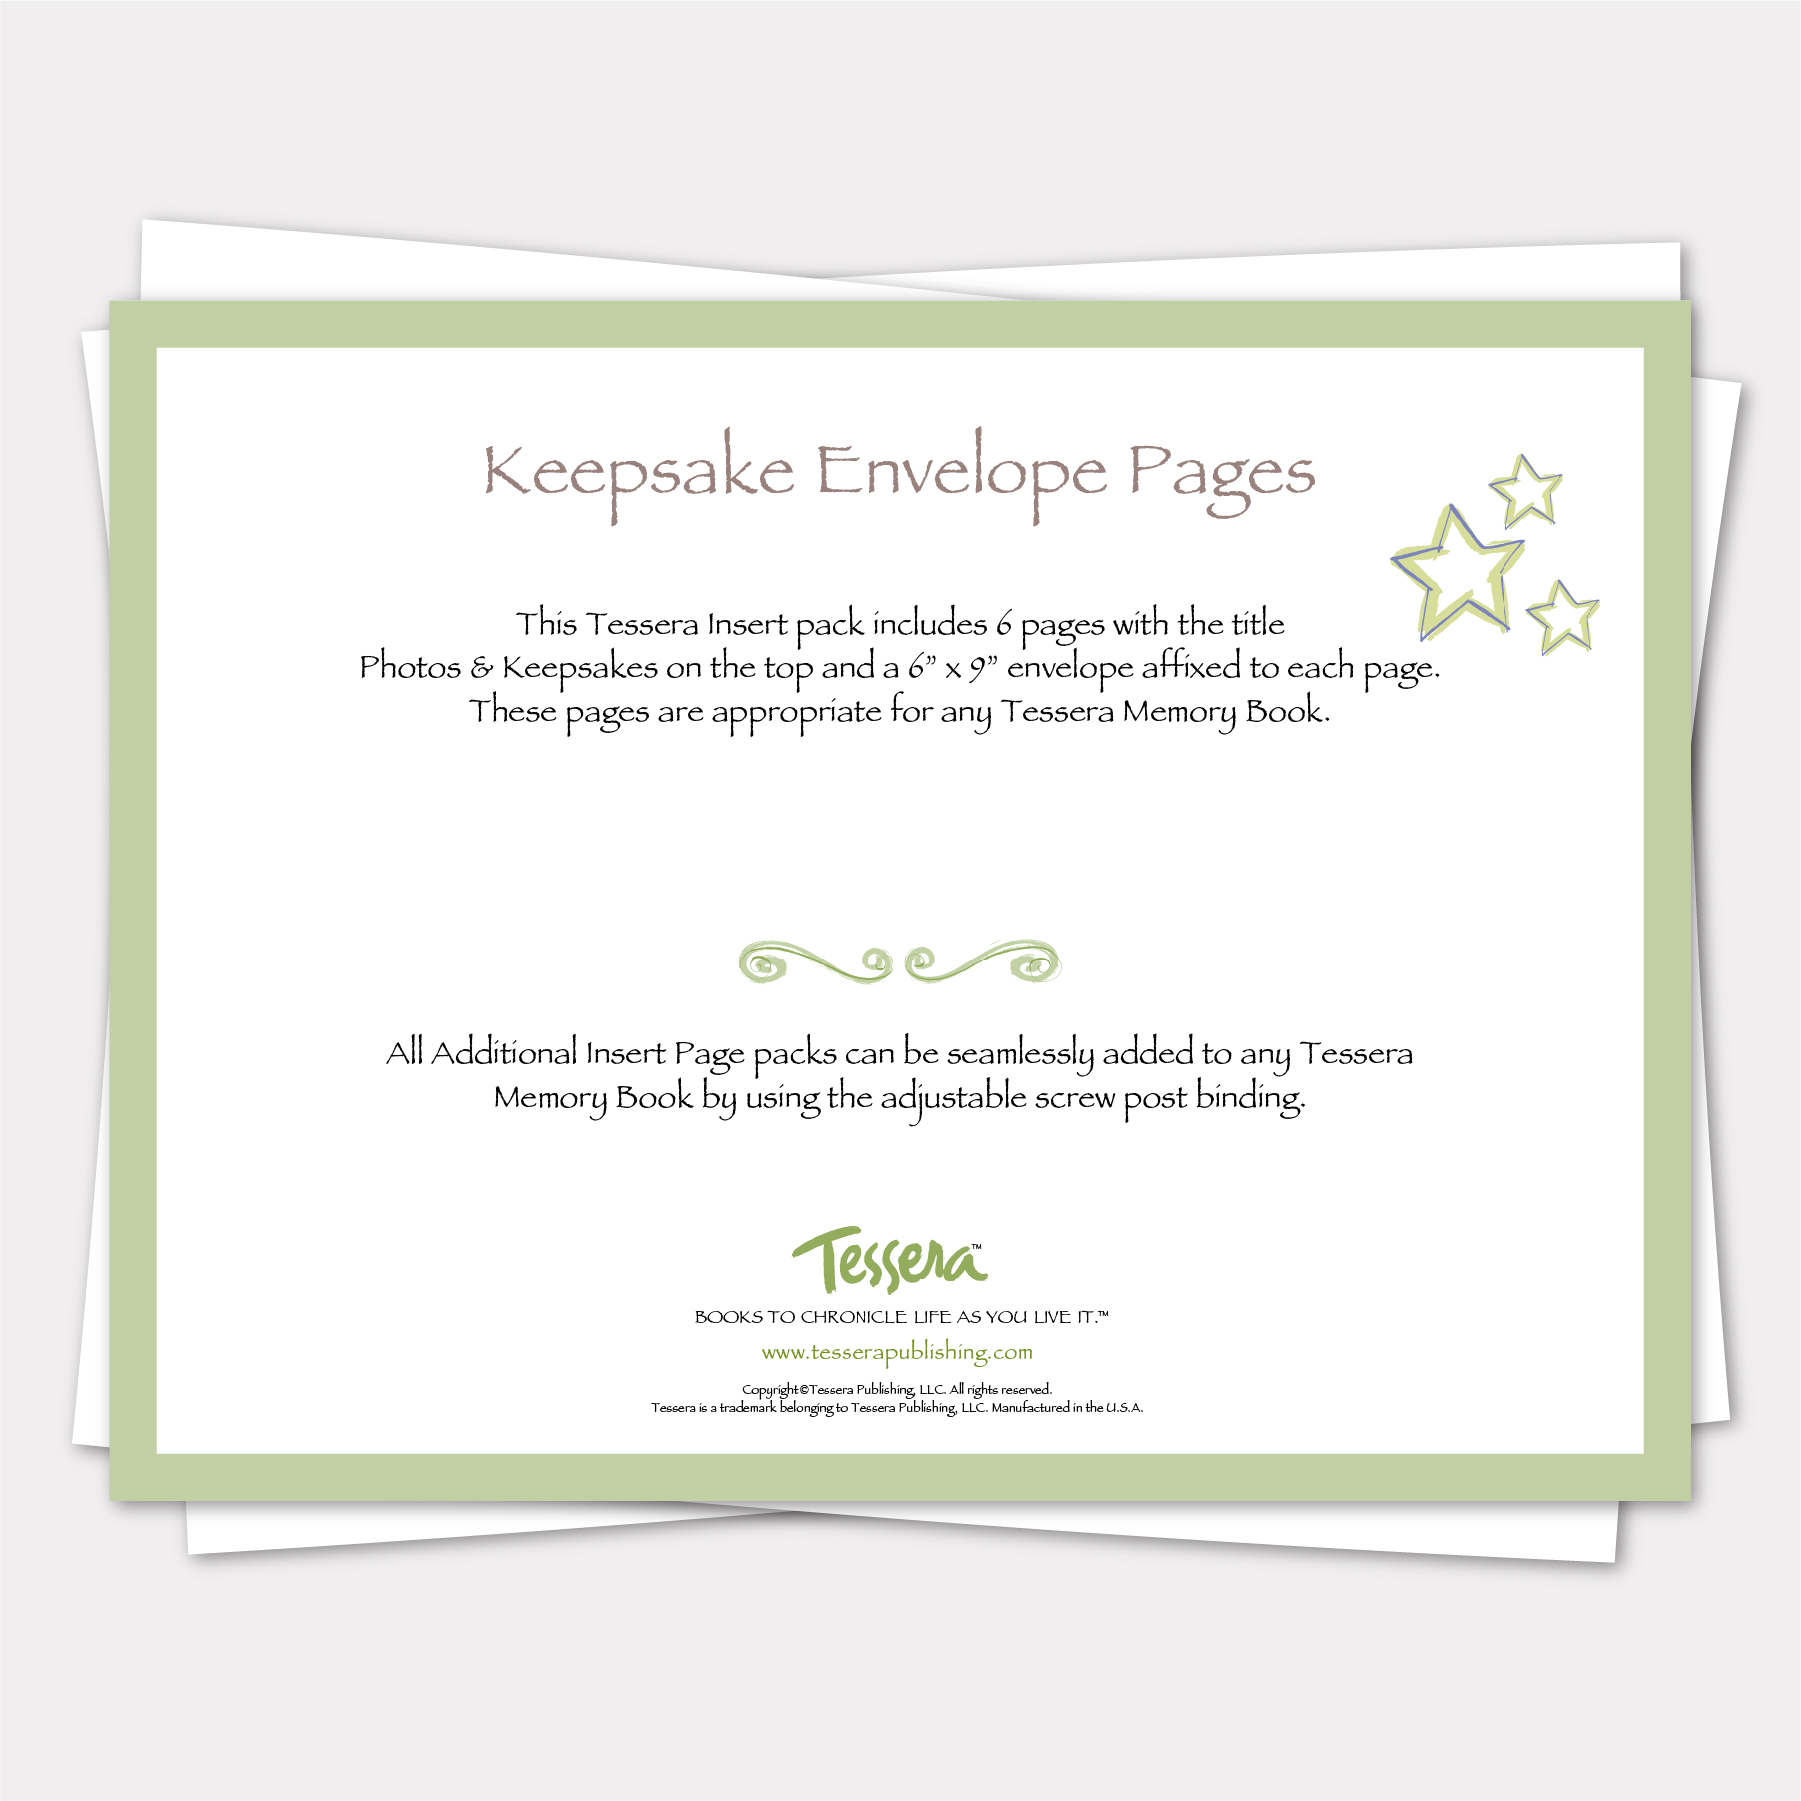 keepsake envelop additional insert pages for tessera memory books